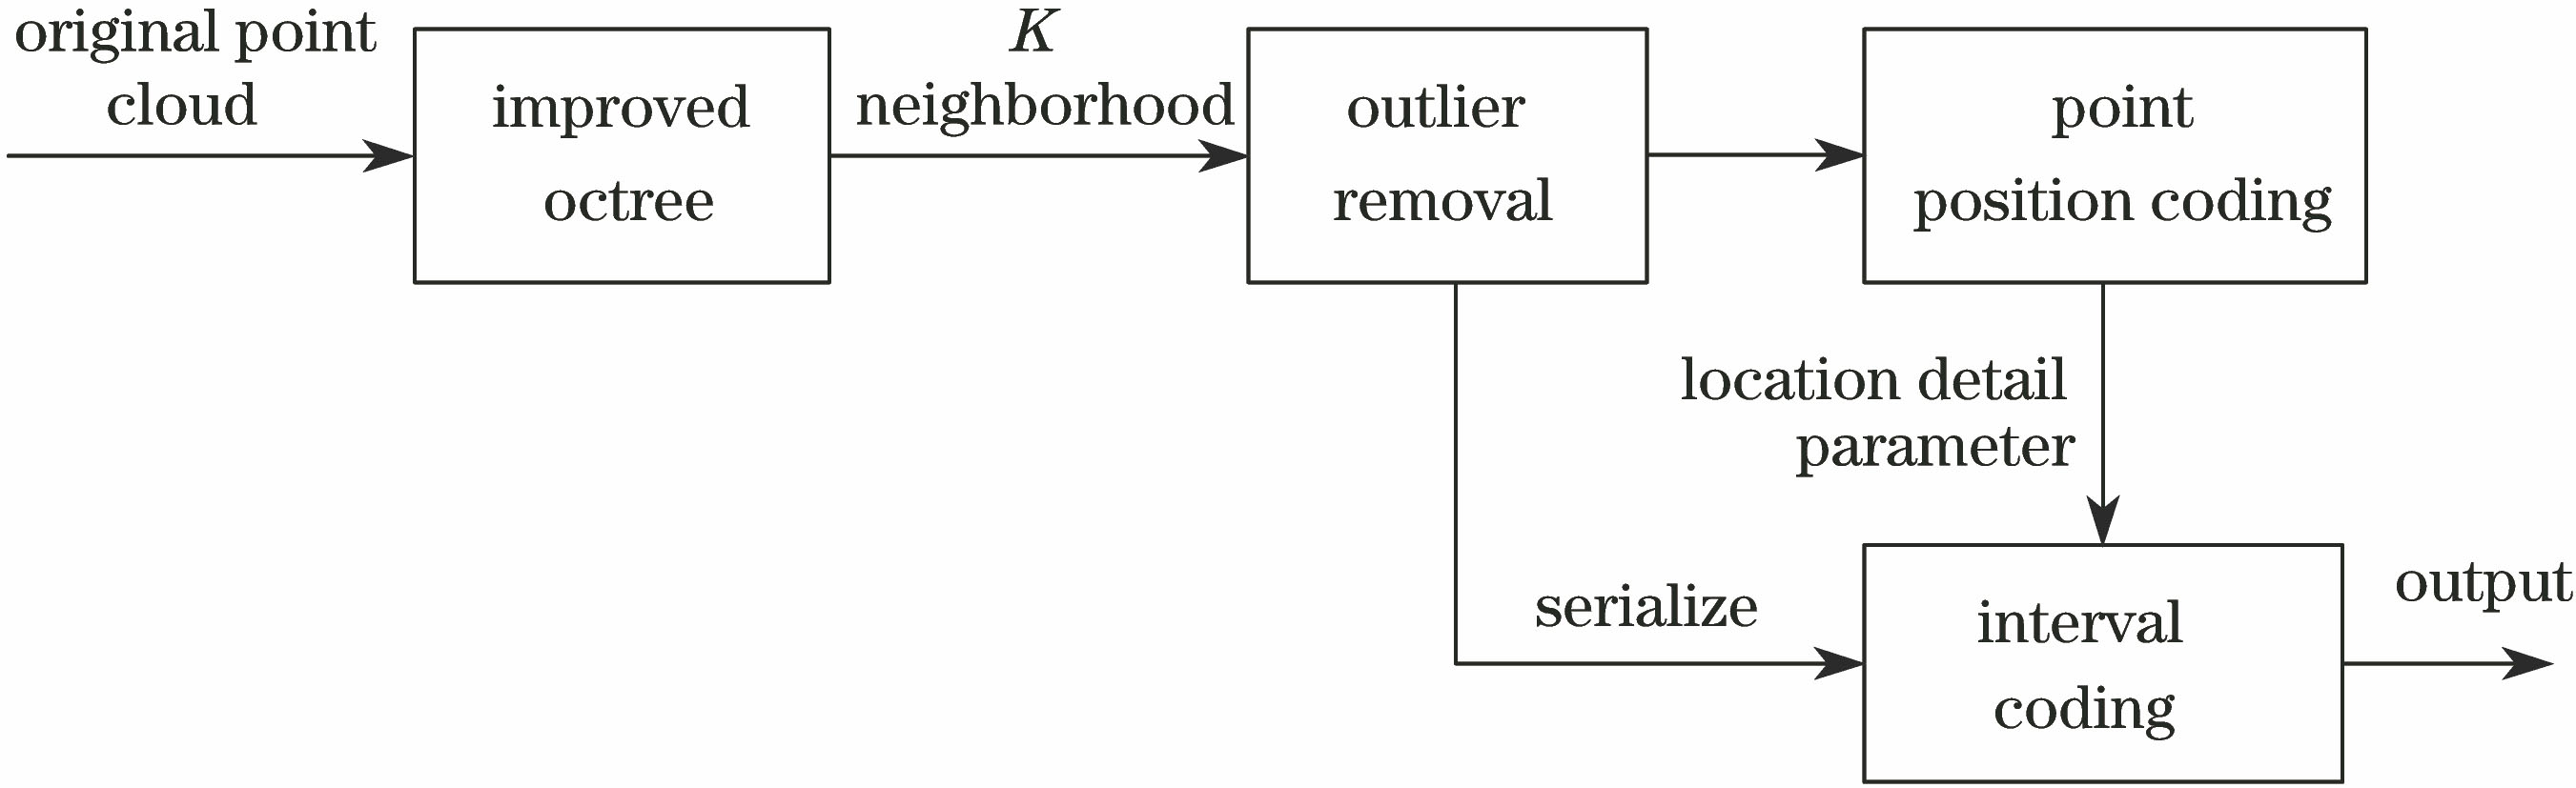 Flowchart of the proposed algorithm